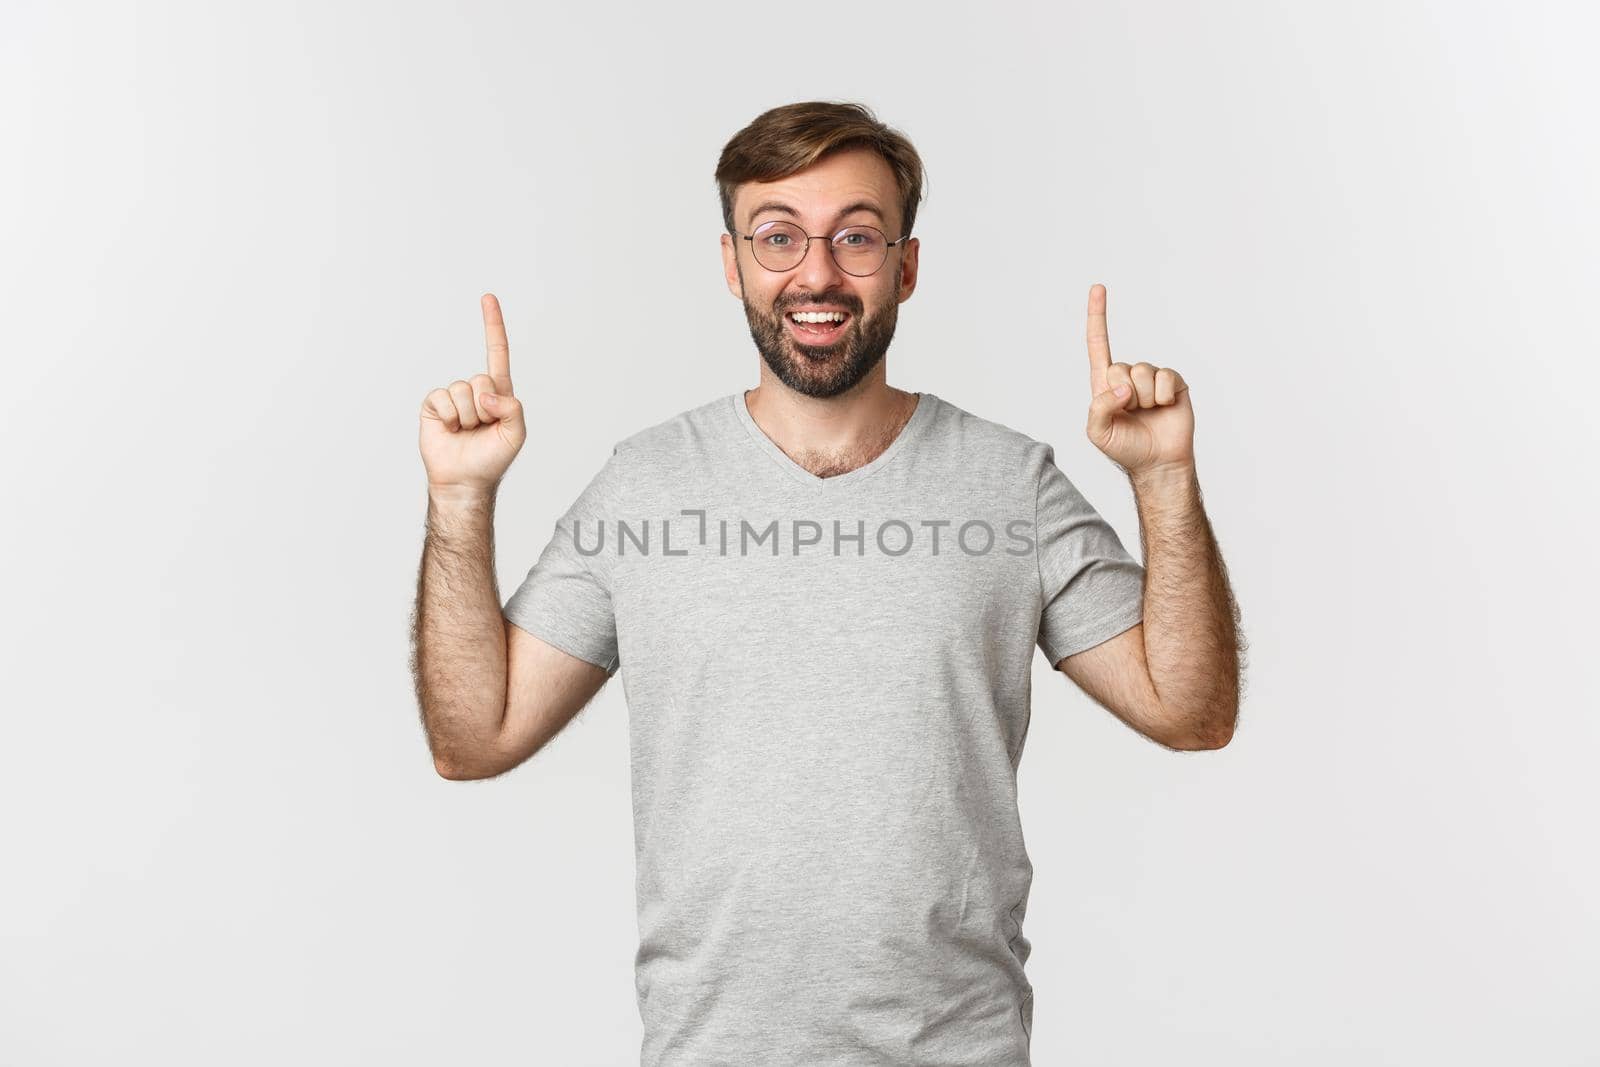 Cheerful bearded man smiling, pointing fingers up, showing logo, wearing gray t-shirt, standing over white background.